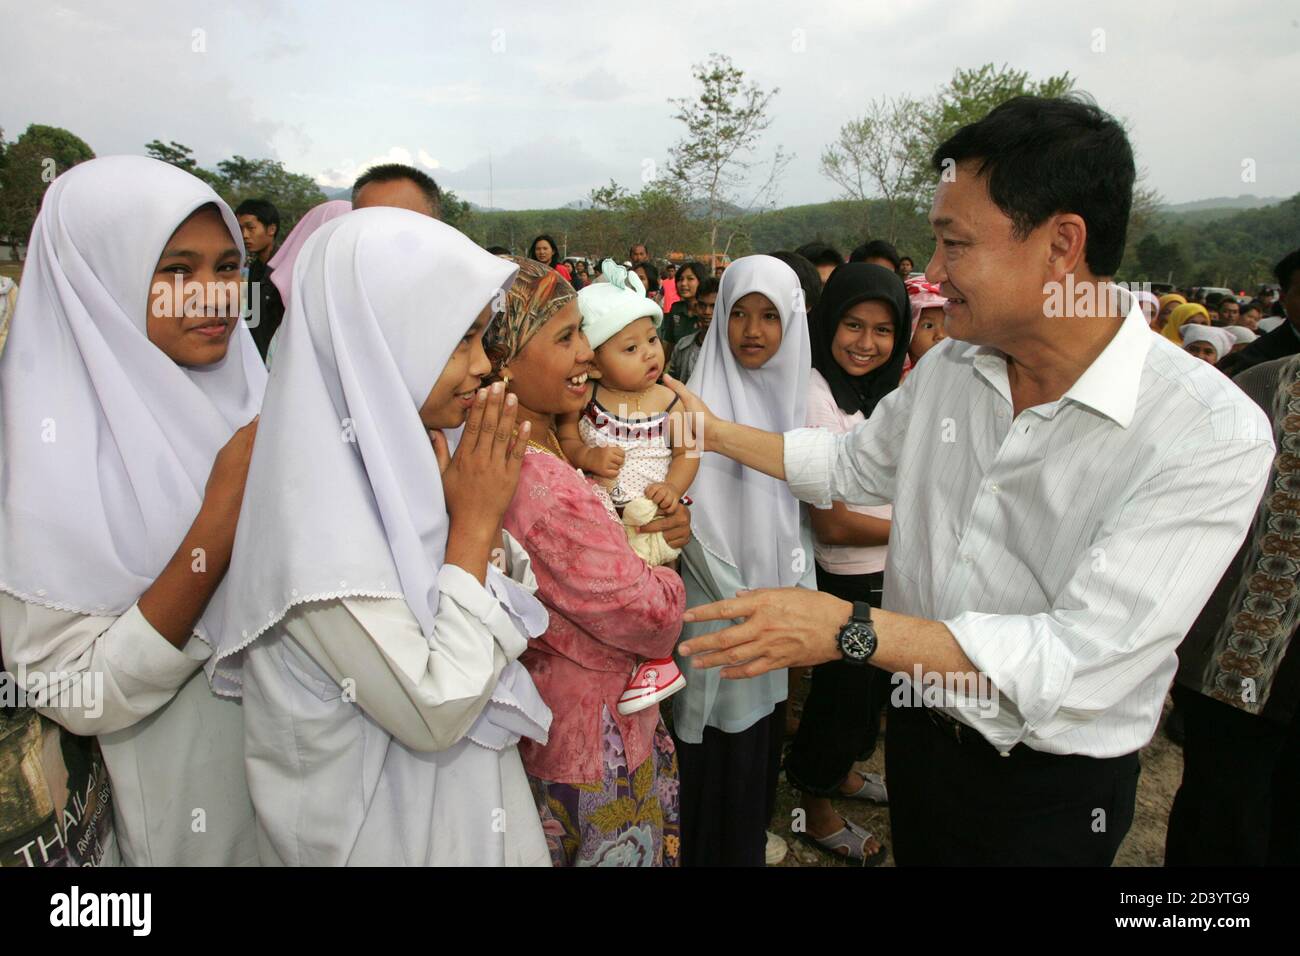 Thai Prime Minister Thaksin Shinawatra meets villagers in Yala province, 1,200 km (750 miles) south of Bangkok, on February 16, 2005. Thaksin arrived in the largely Muslim south on Wednesday with a stern message for villagers tempted to help separatist militants. REUTERS/Sukree Sukplang  SS/SA Stock Photo